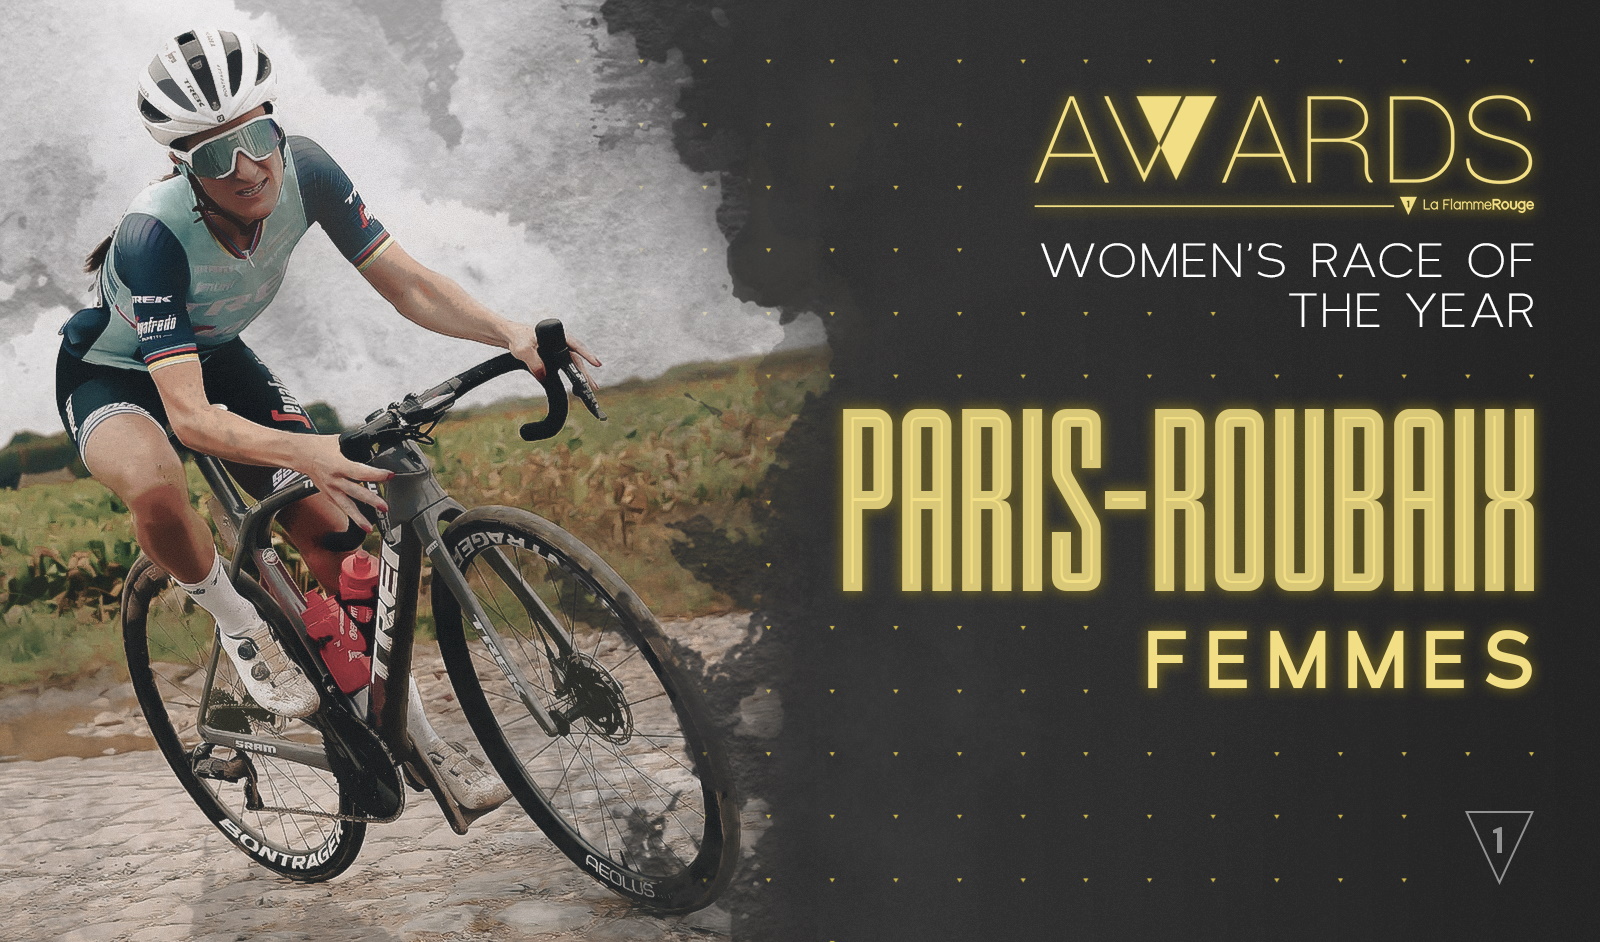 Women’s race of the year